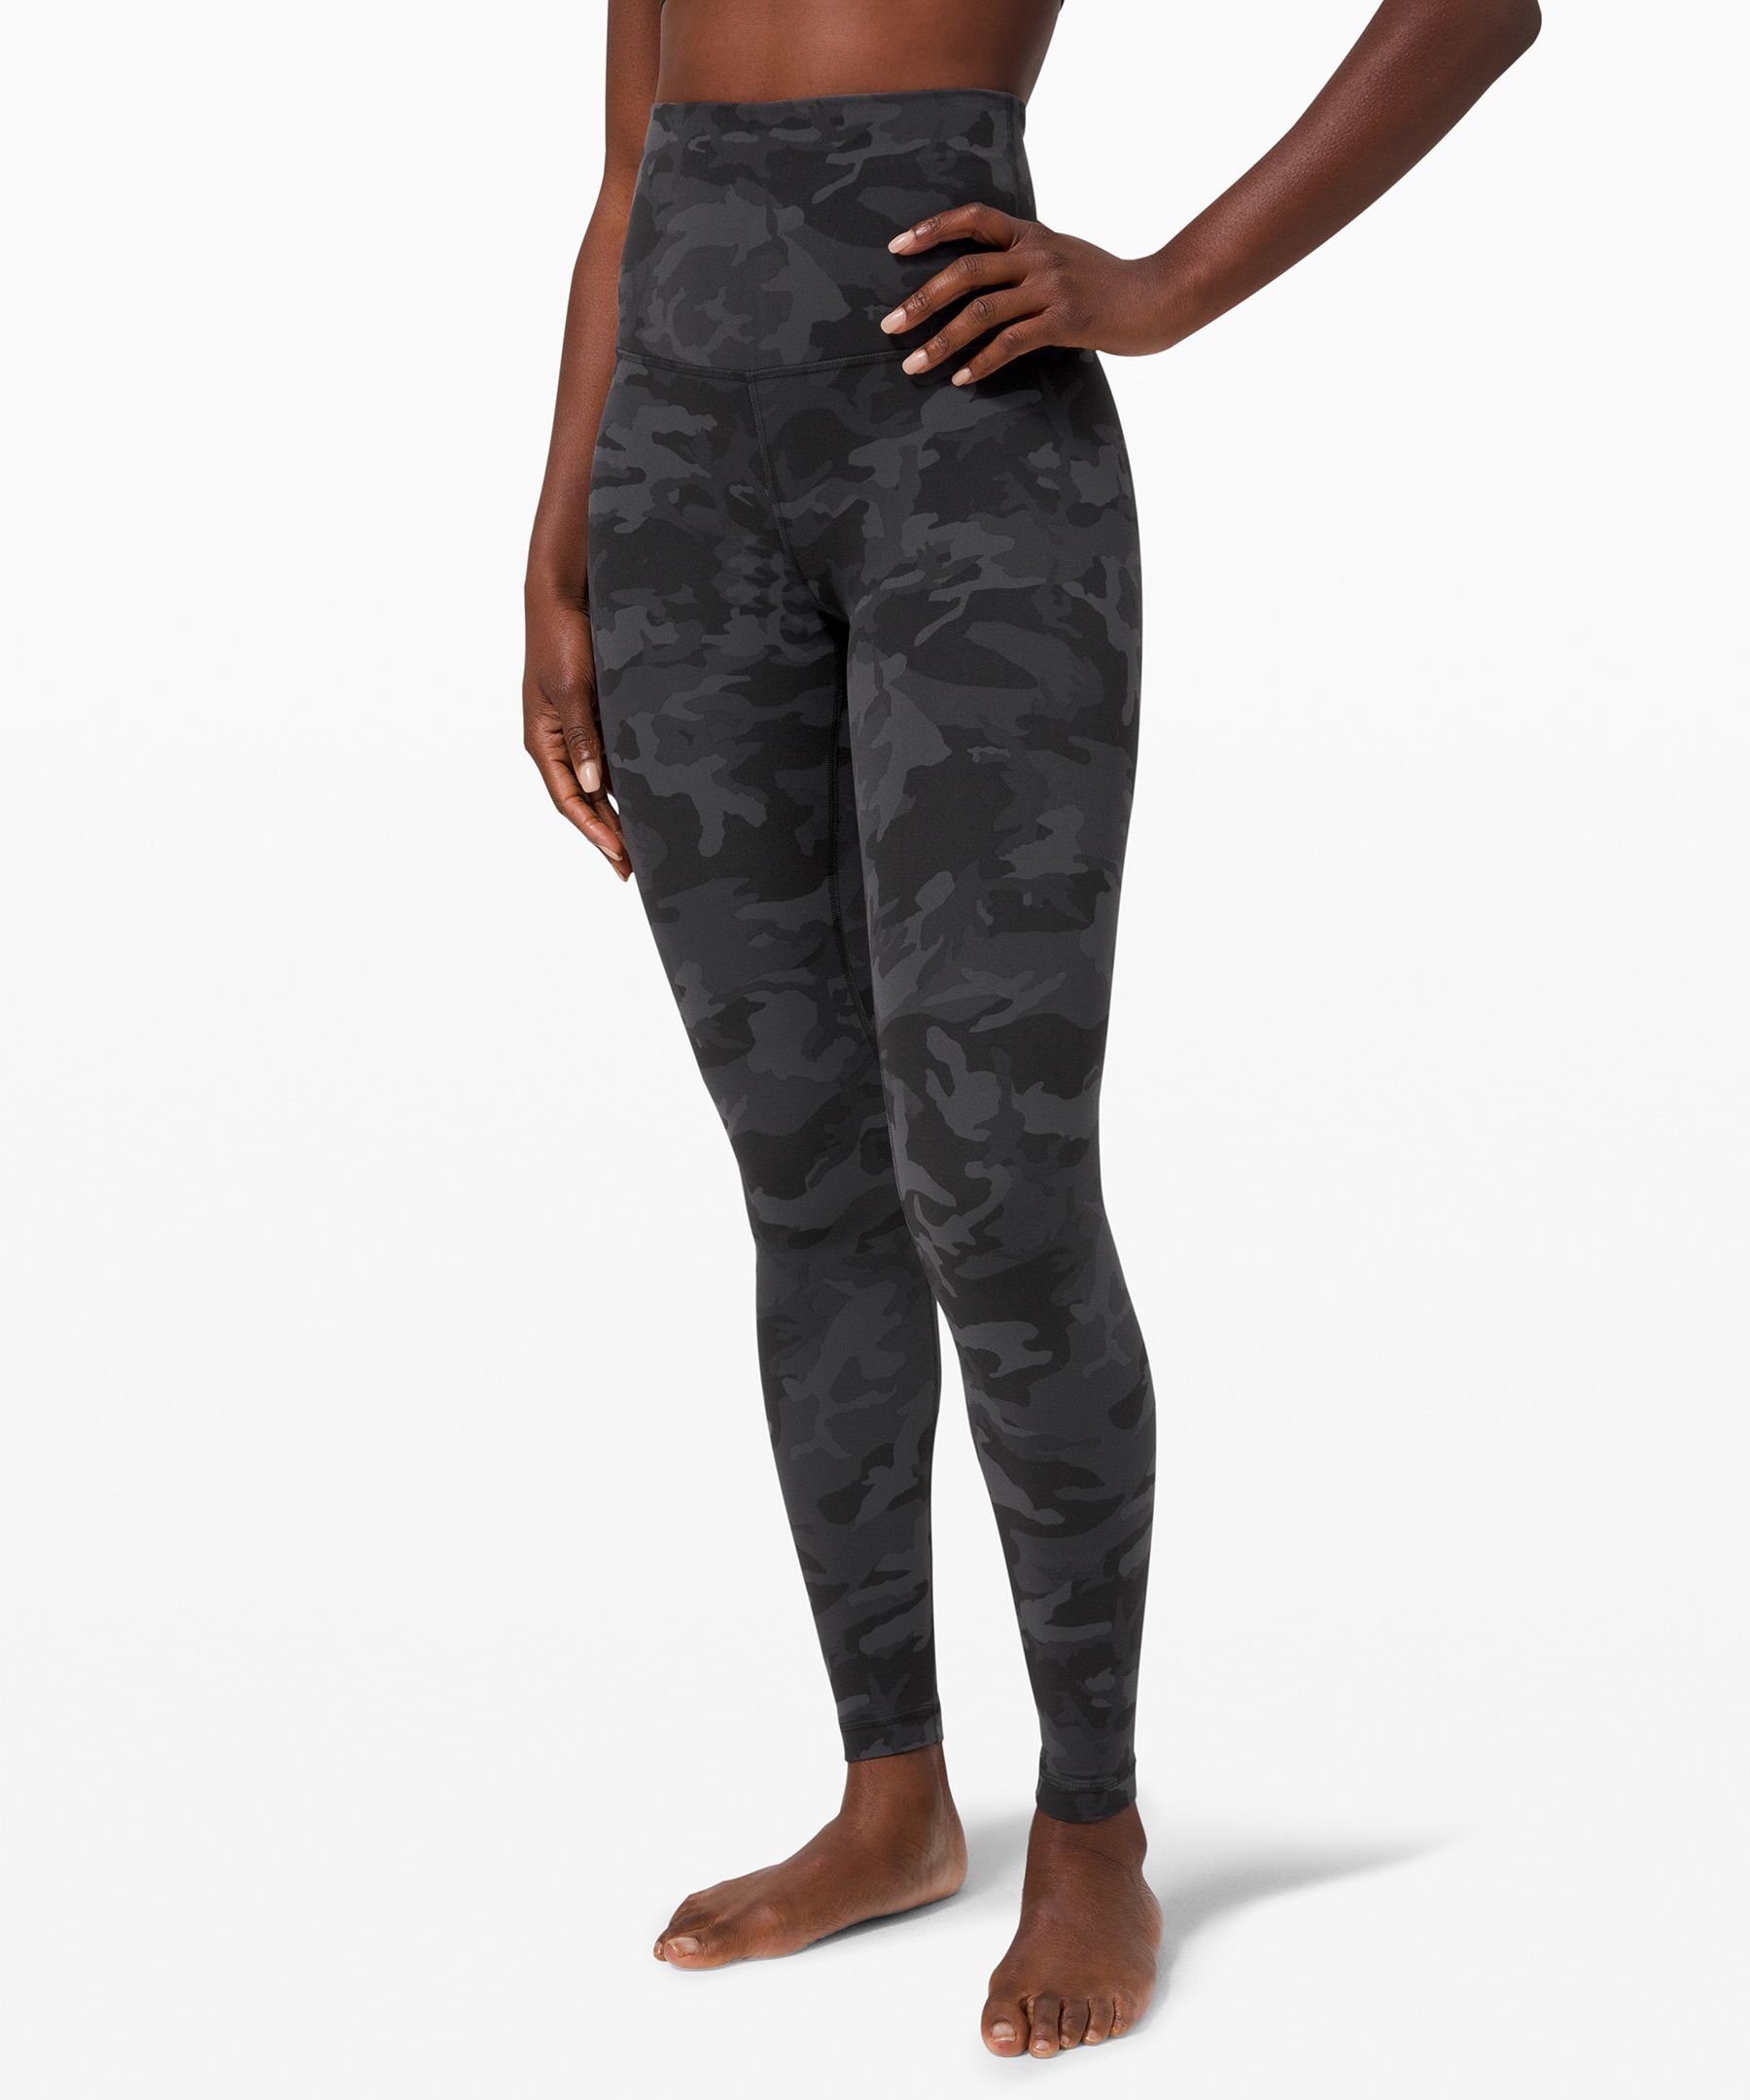 Lululemon Align™ Pant Super High-rise 28 In Incognito Camo Grey